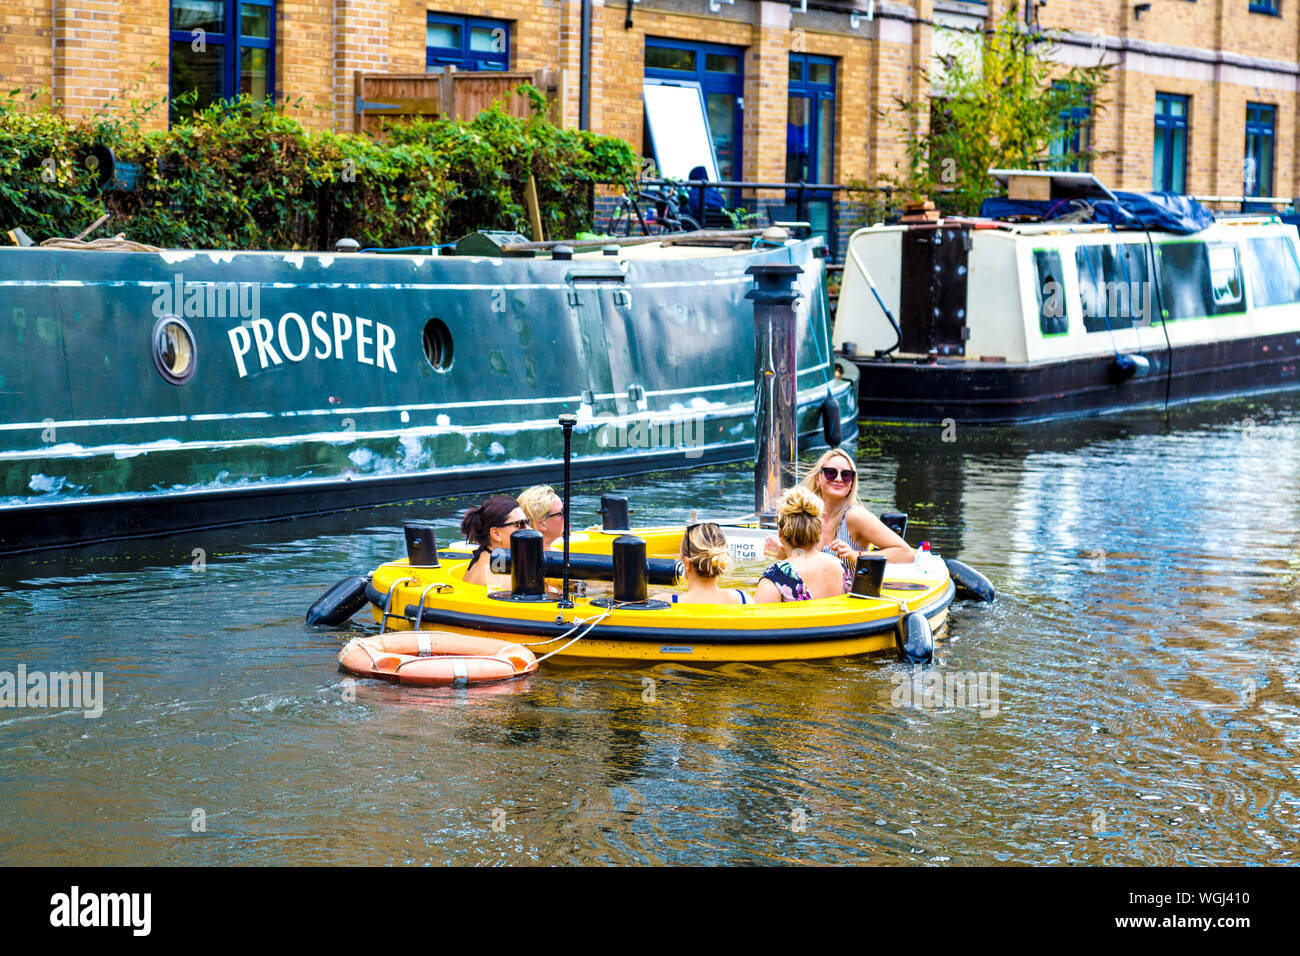 A group of women in a floating hot tub on Regent's Canal, London, UK Stock Photo